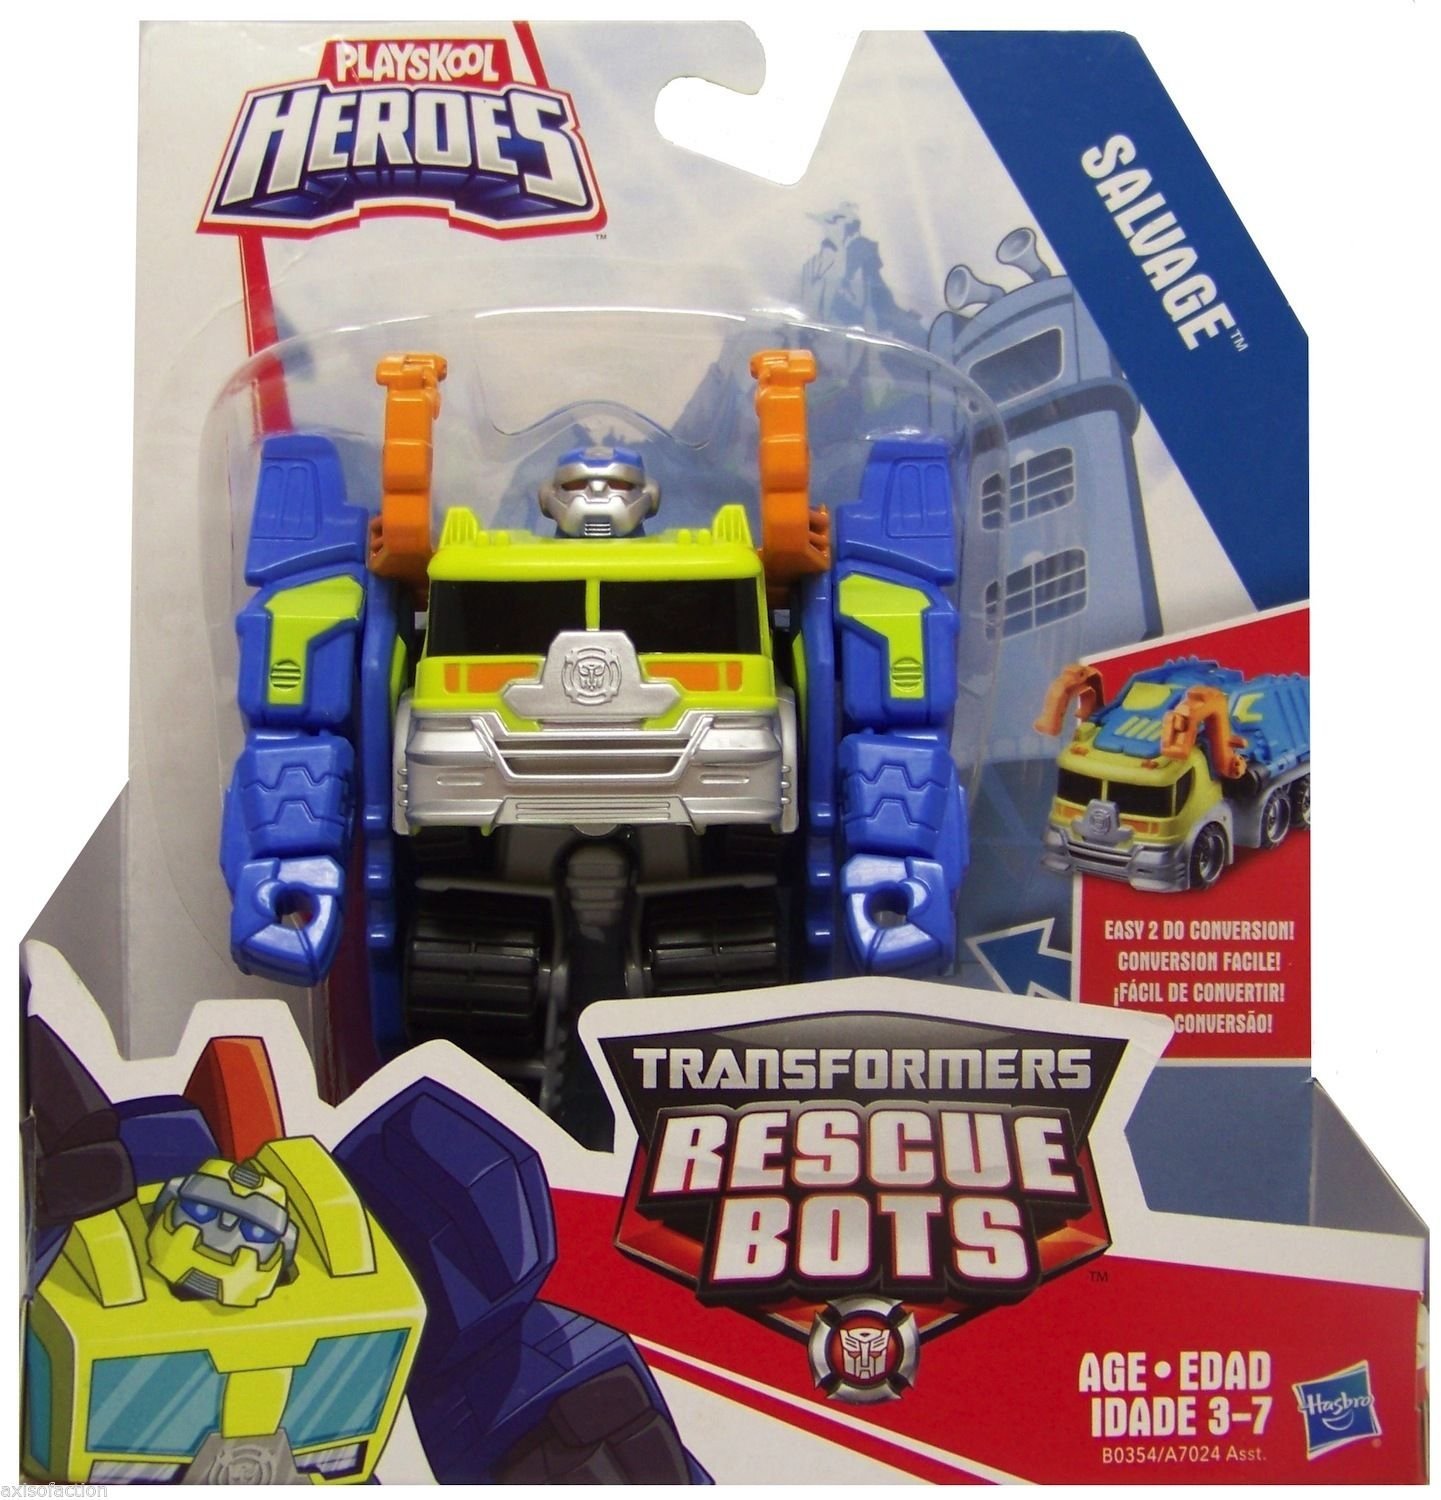 Salvage-rescuebots-carded.jpg